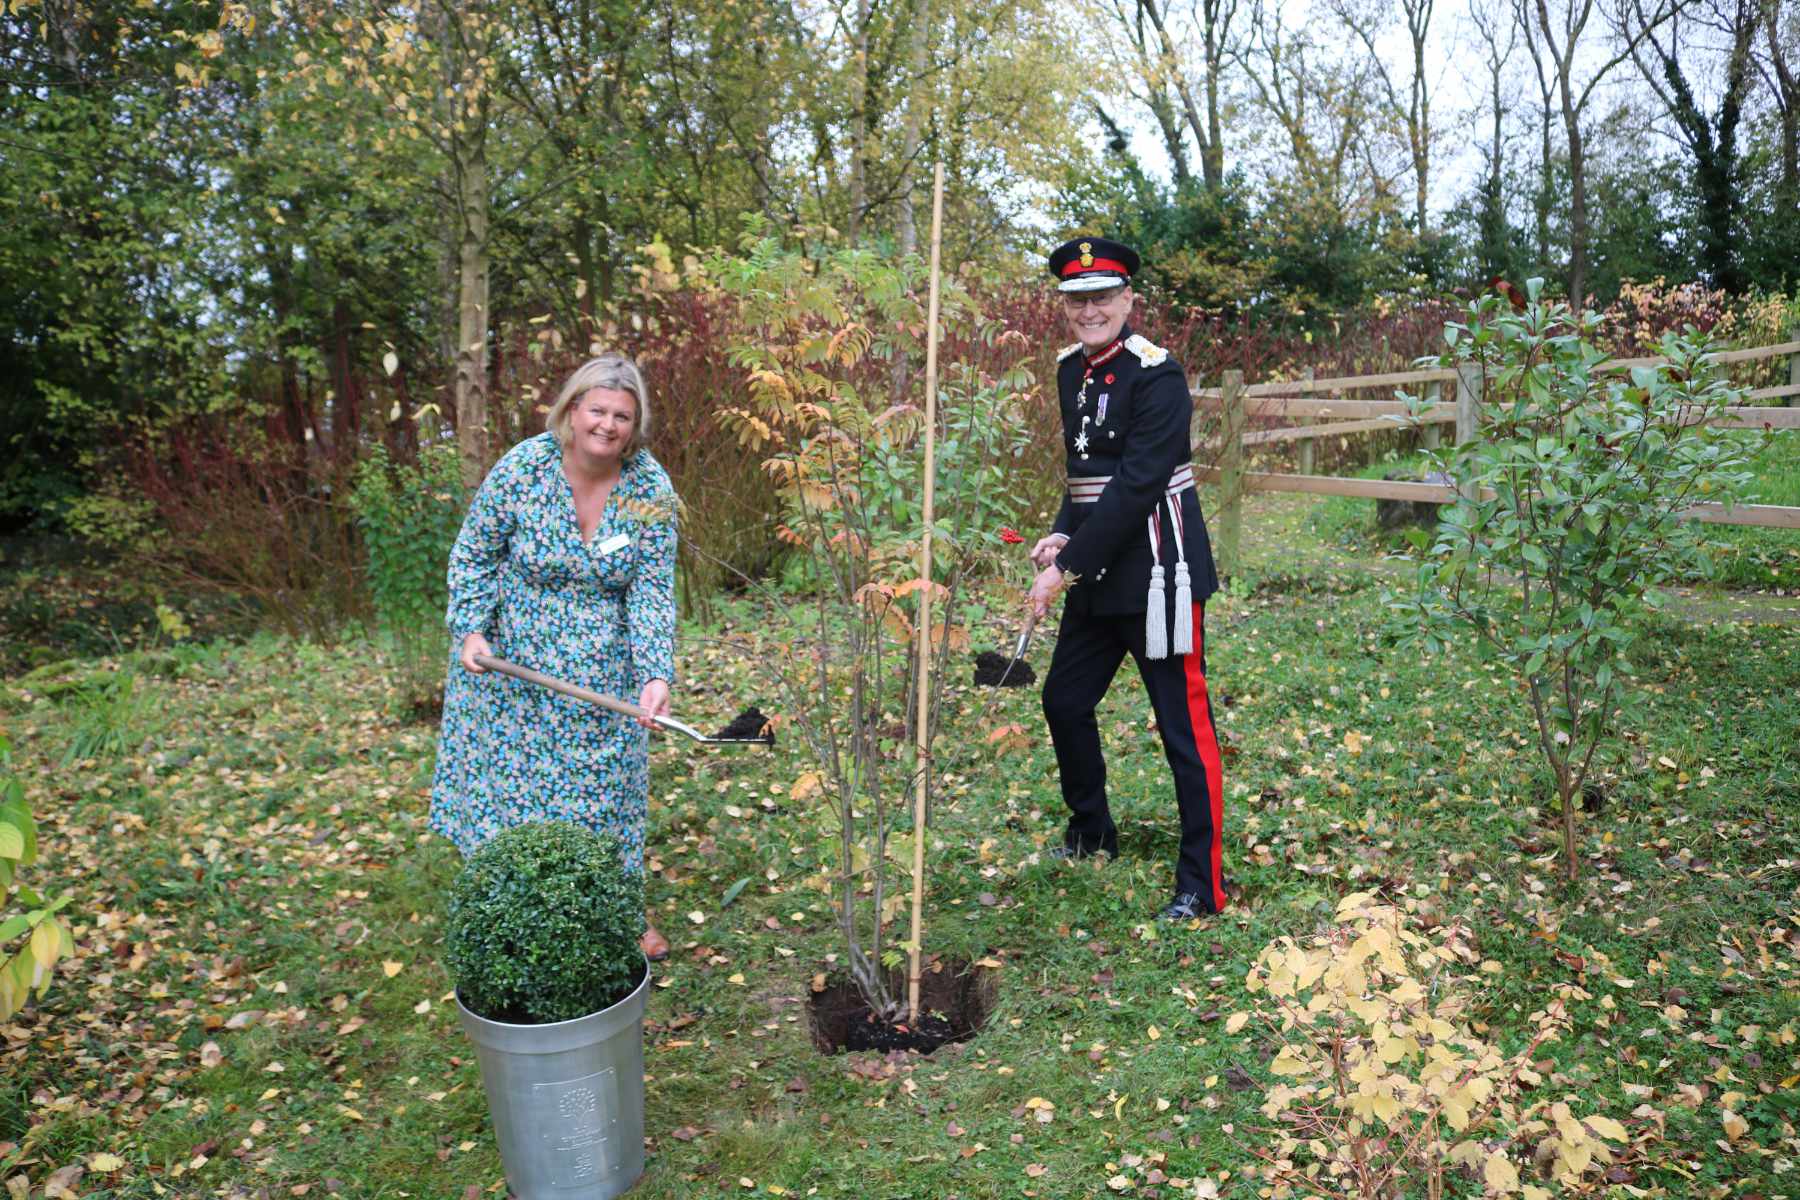 Clair Holdsworth, chief executive of Martin House, and Ed Anderson CBE, Lord-Lieutenant of West Yorkshire, plant the Queen’s jubilee tree in the grounds of Martin House